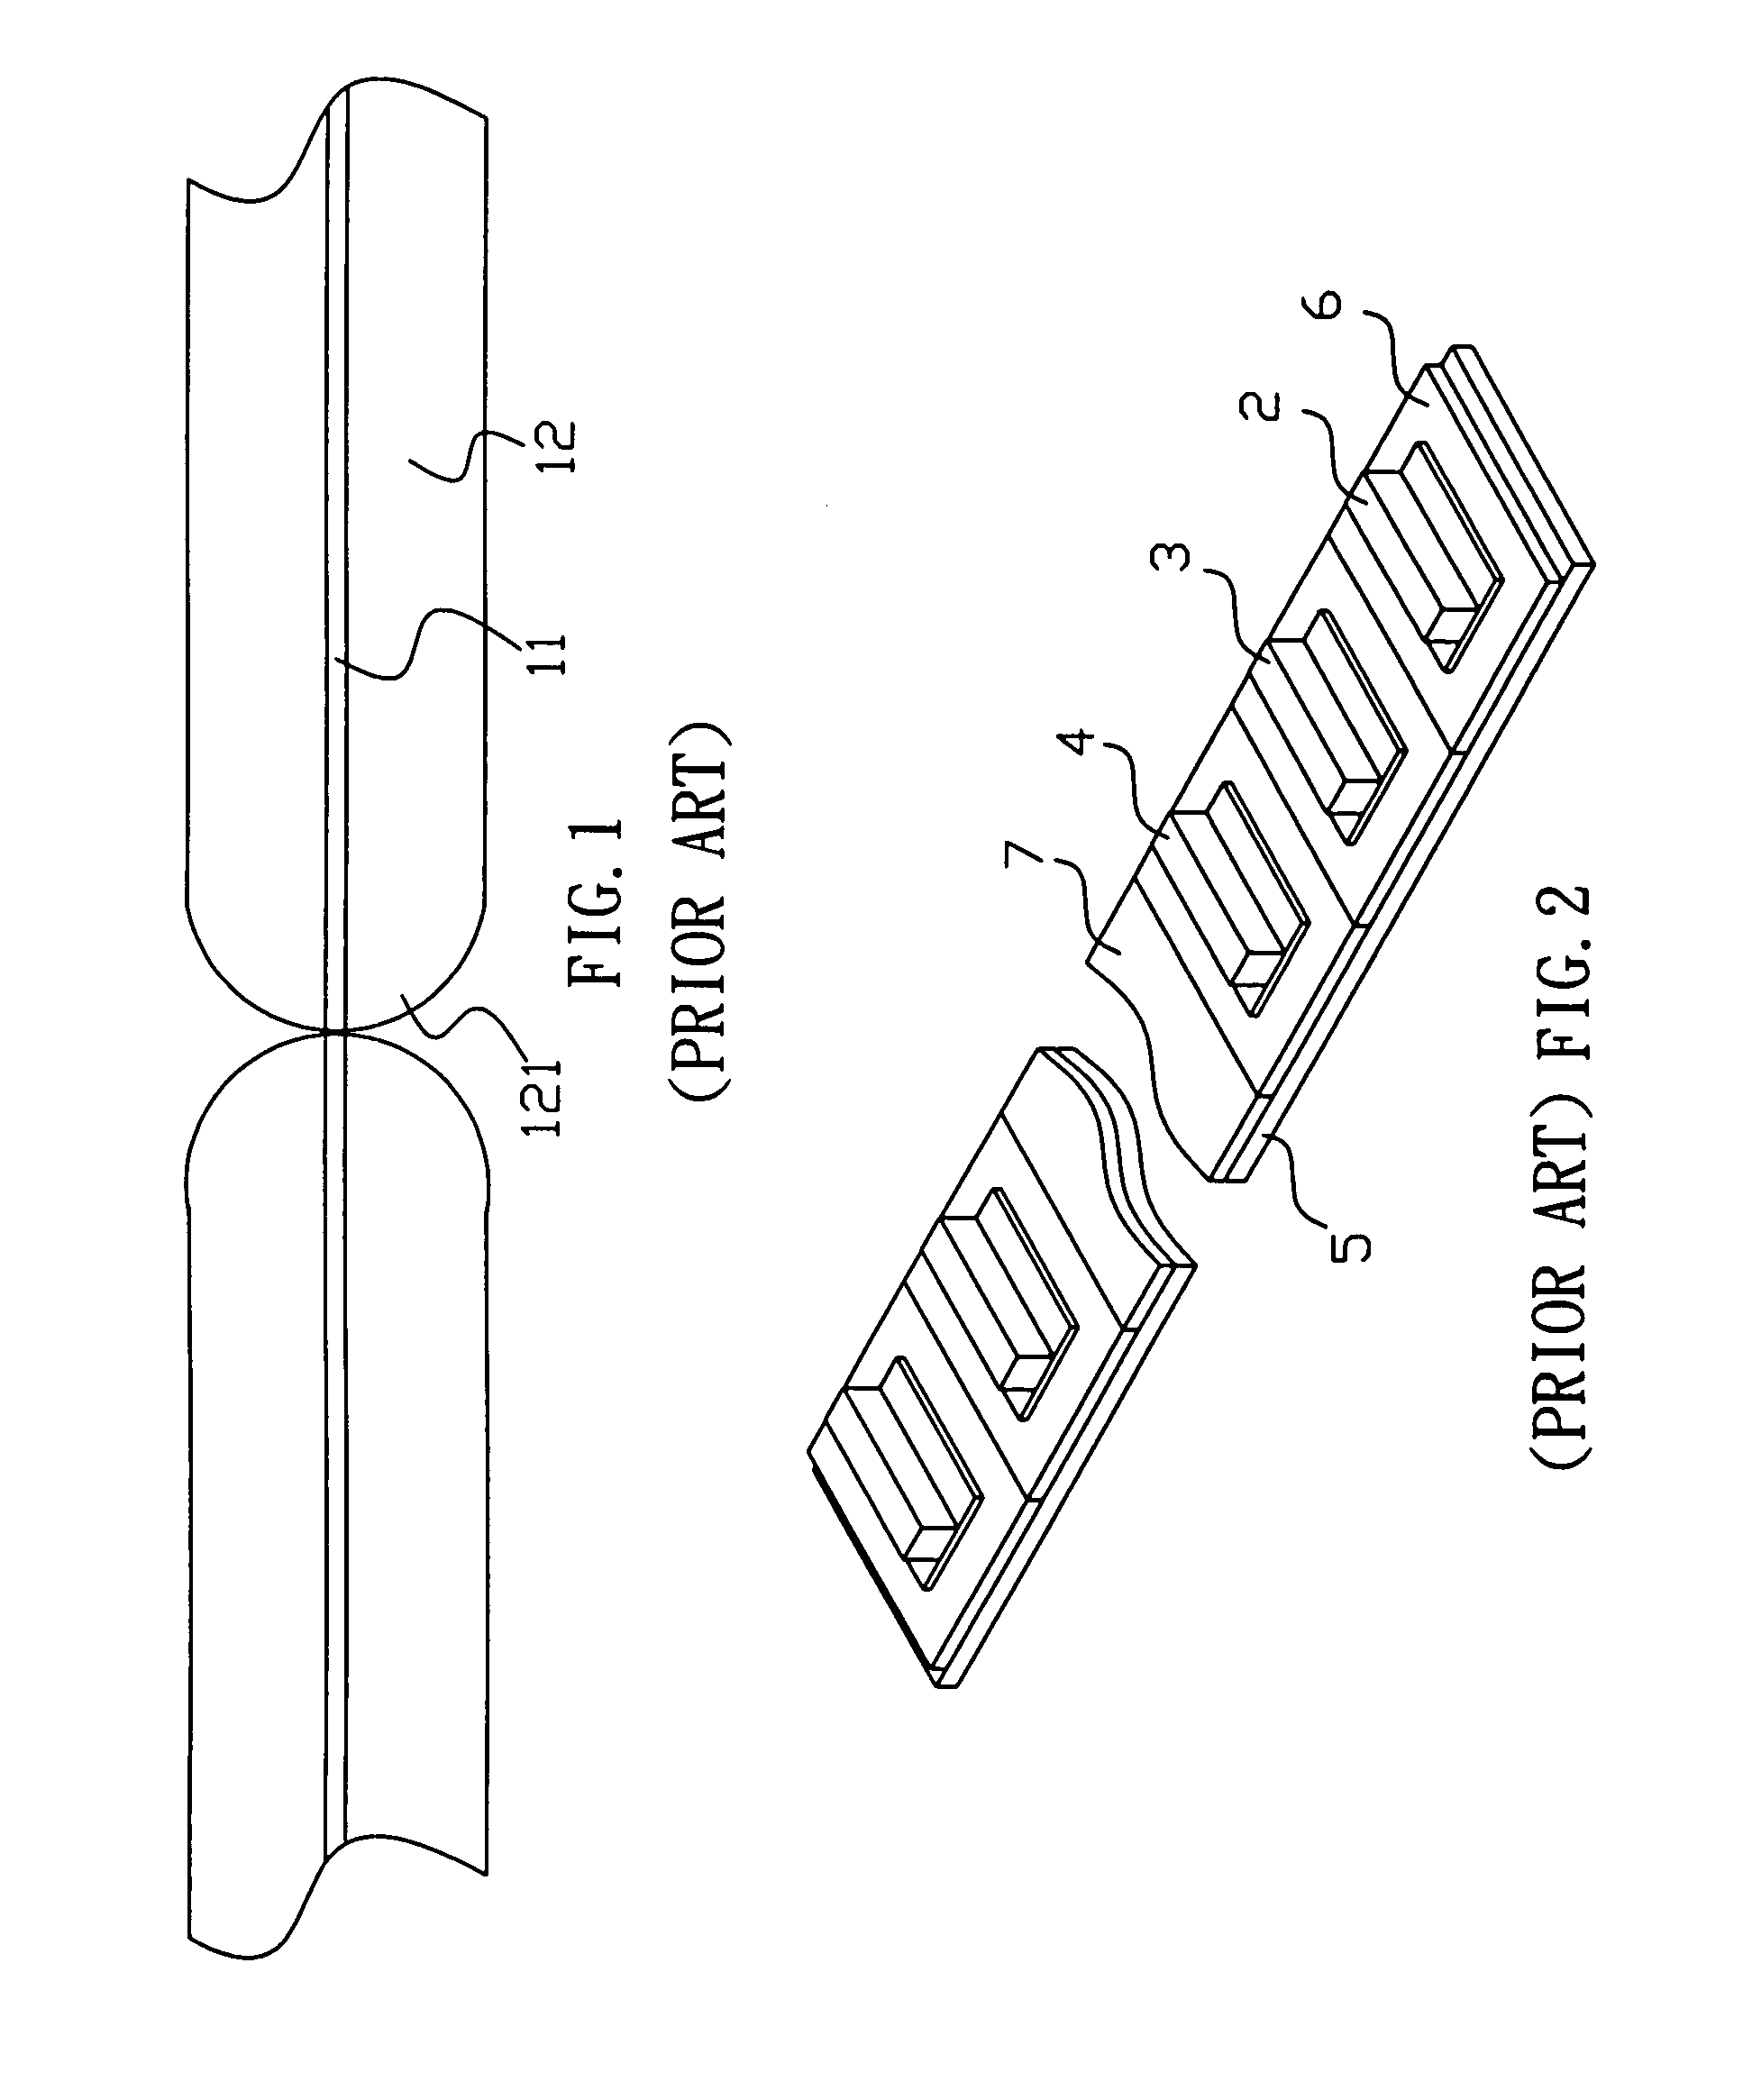 Holder for supporting an end surface of a workpiece during polishing